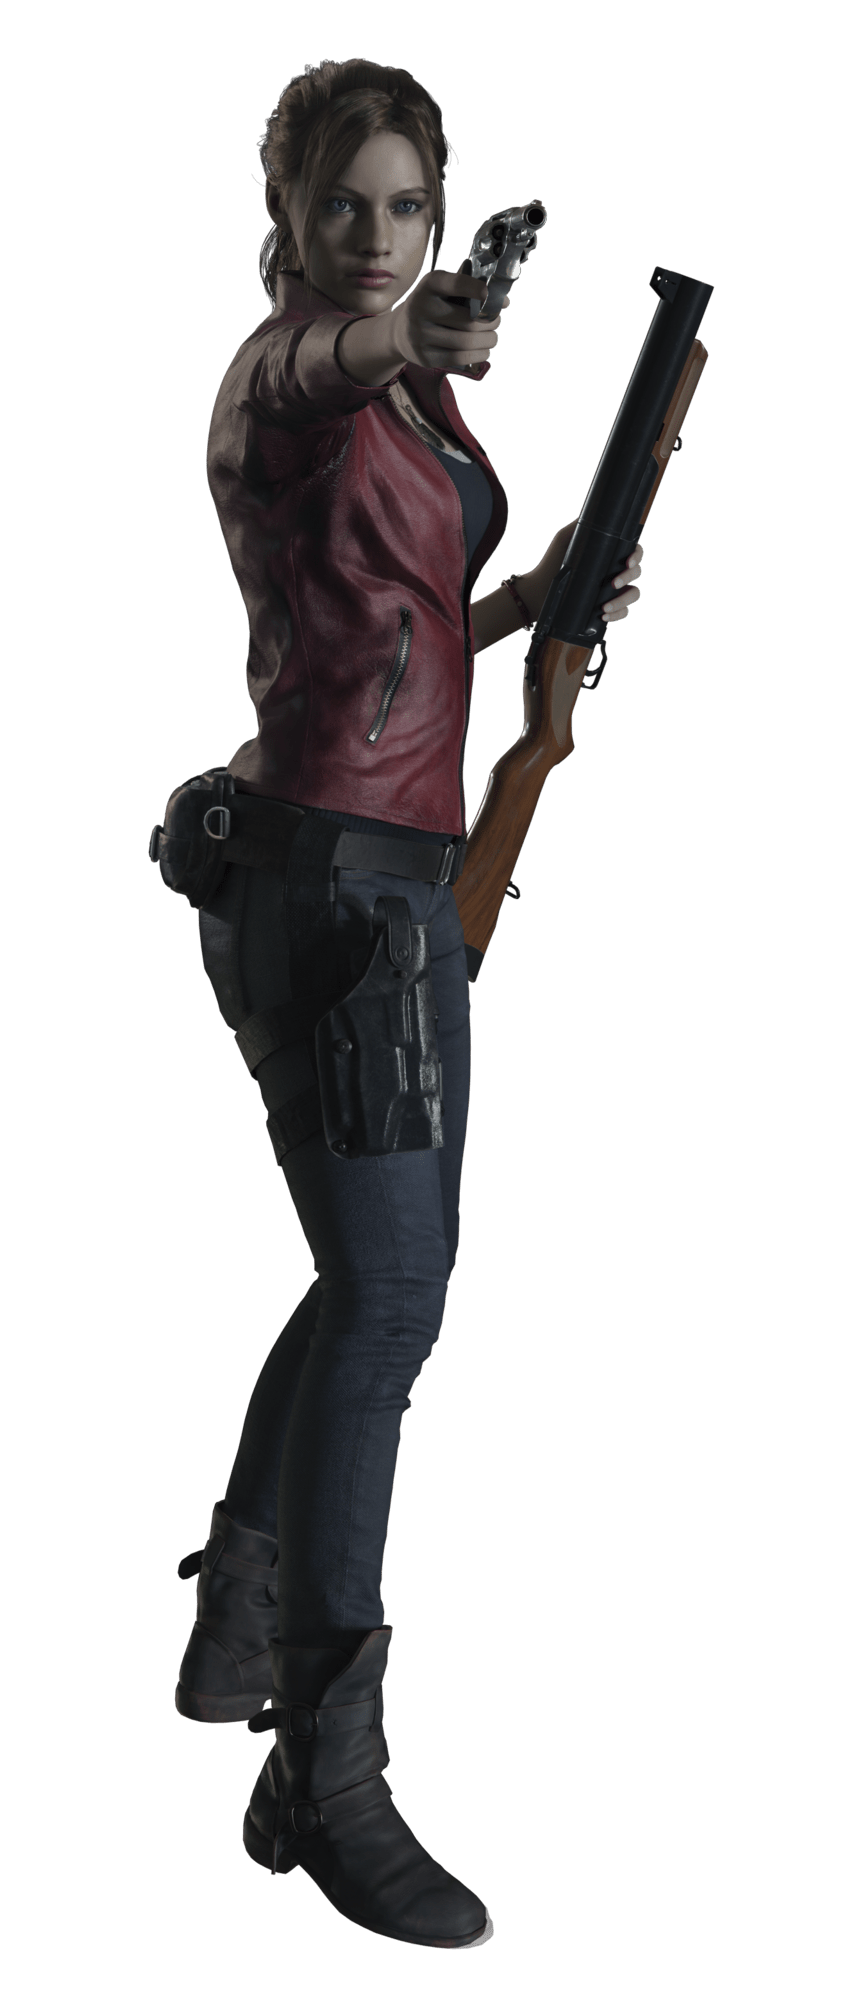 claire redfield resident evil 2 remake